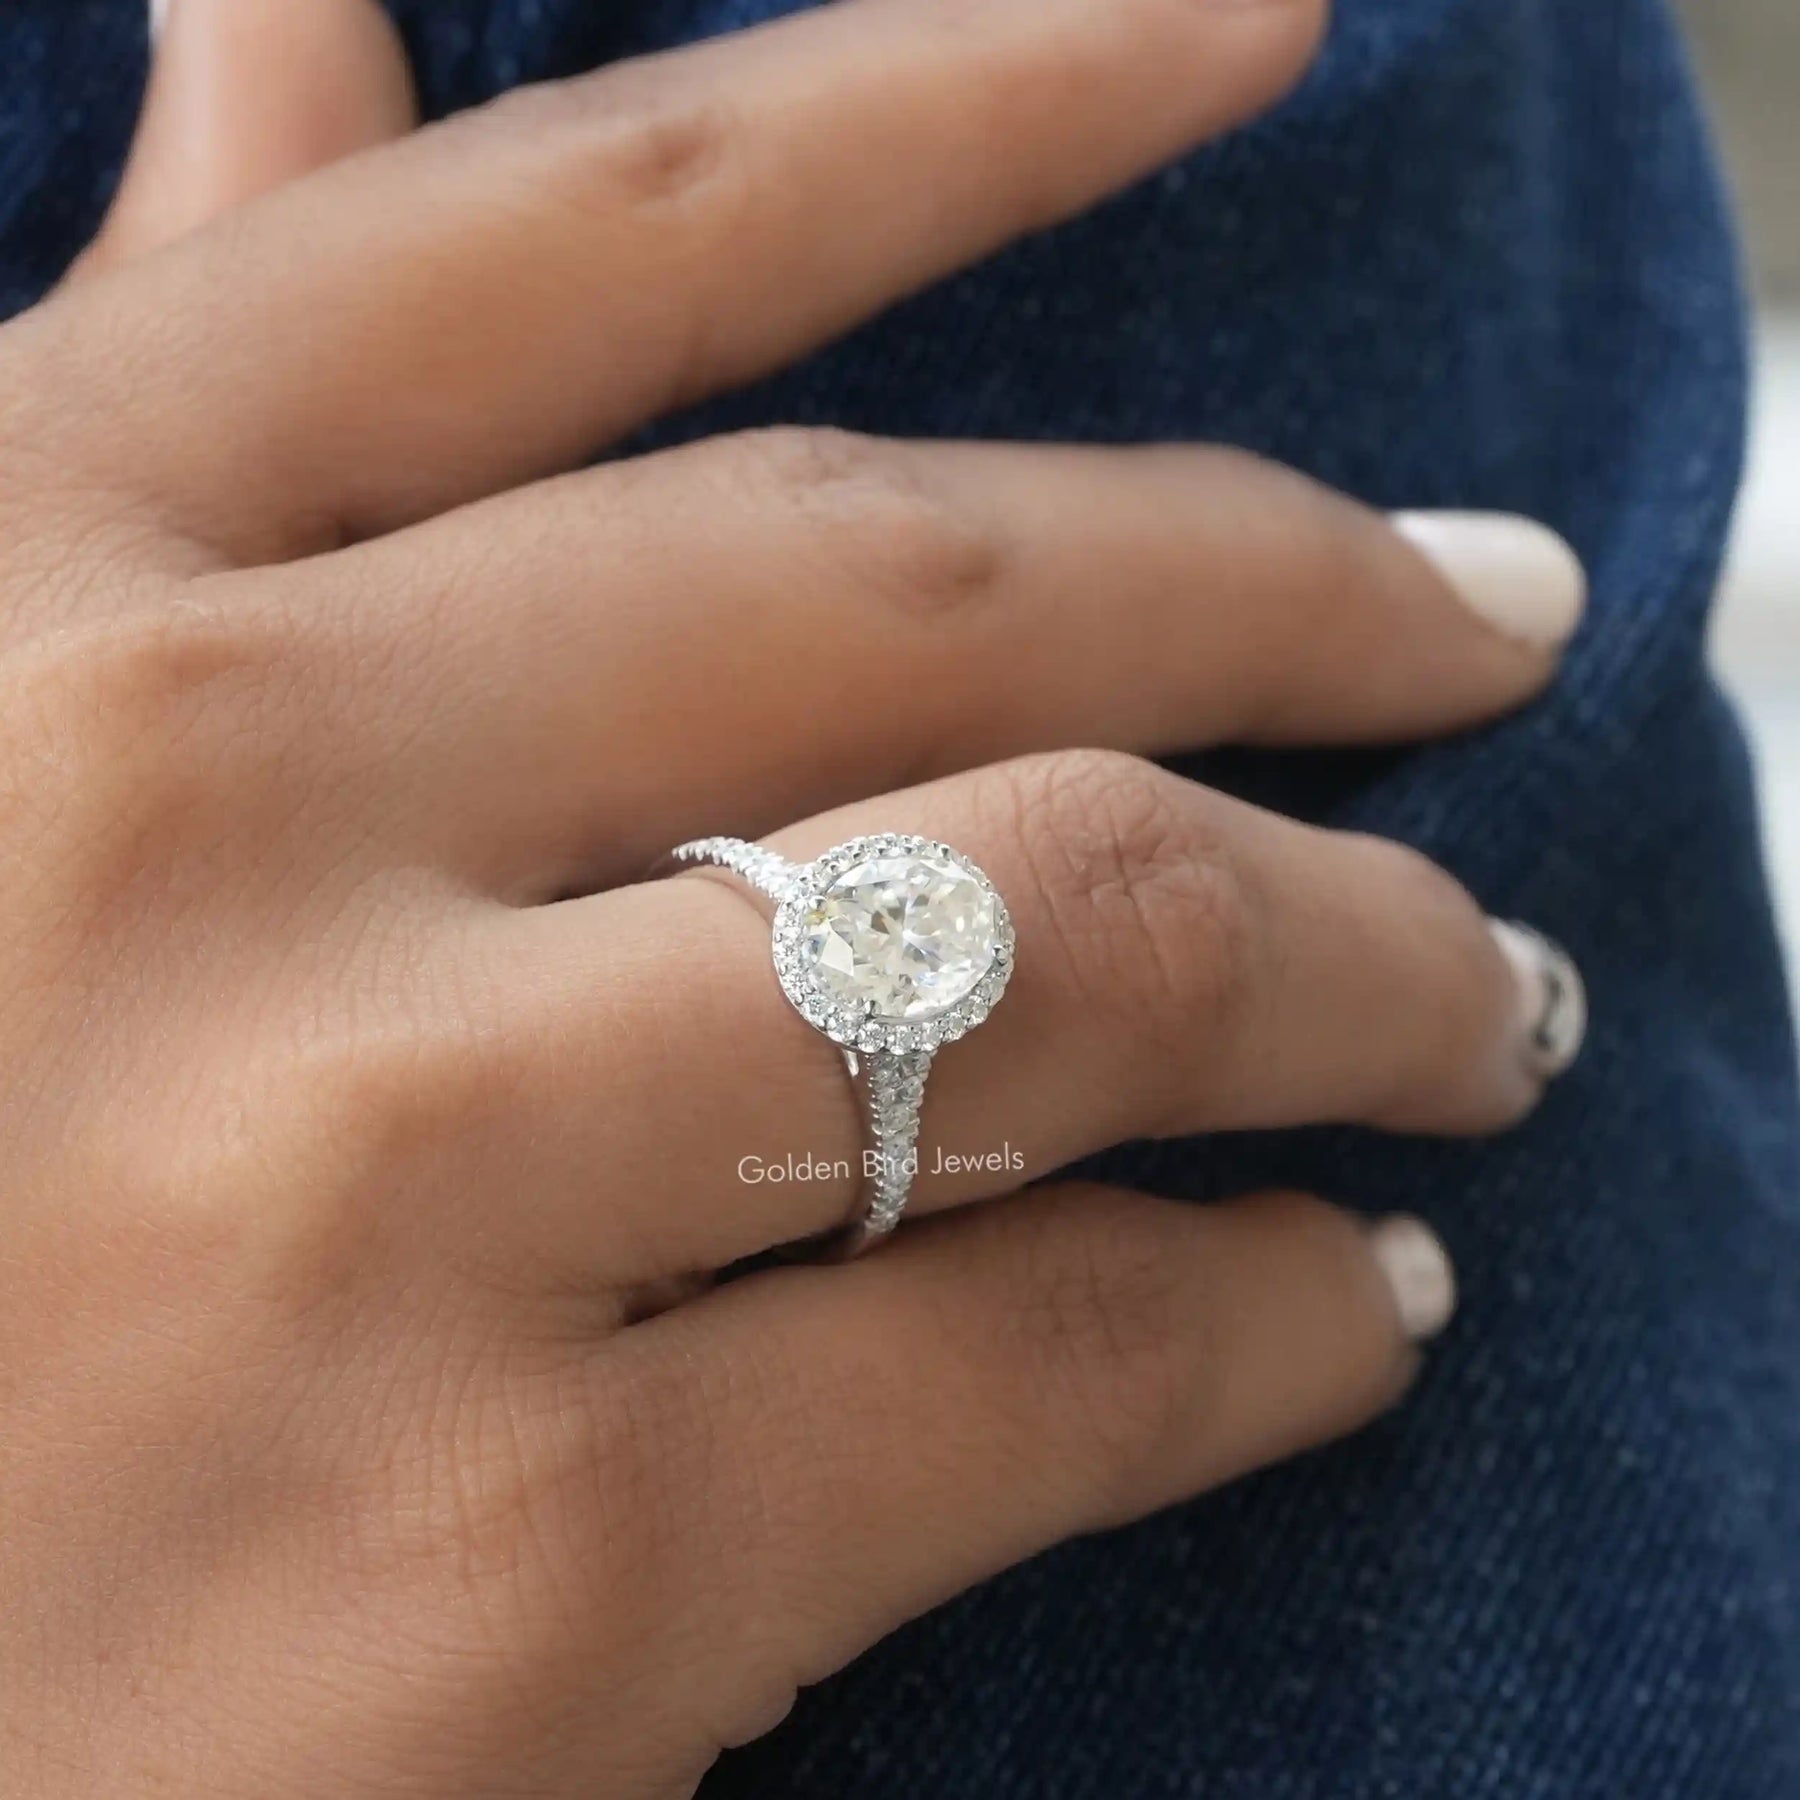 [In finger front view of oval cut moissanite engagement ring made of vvs clarity]-[Golden Bird Jewels]